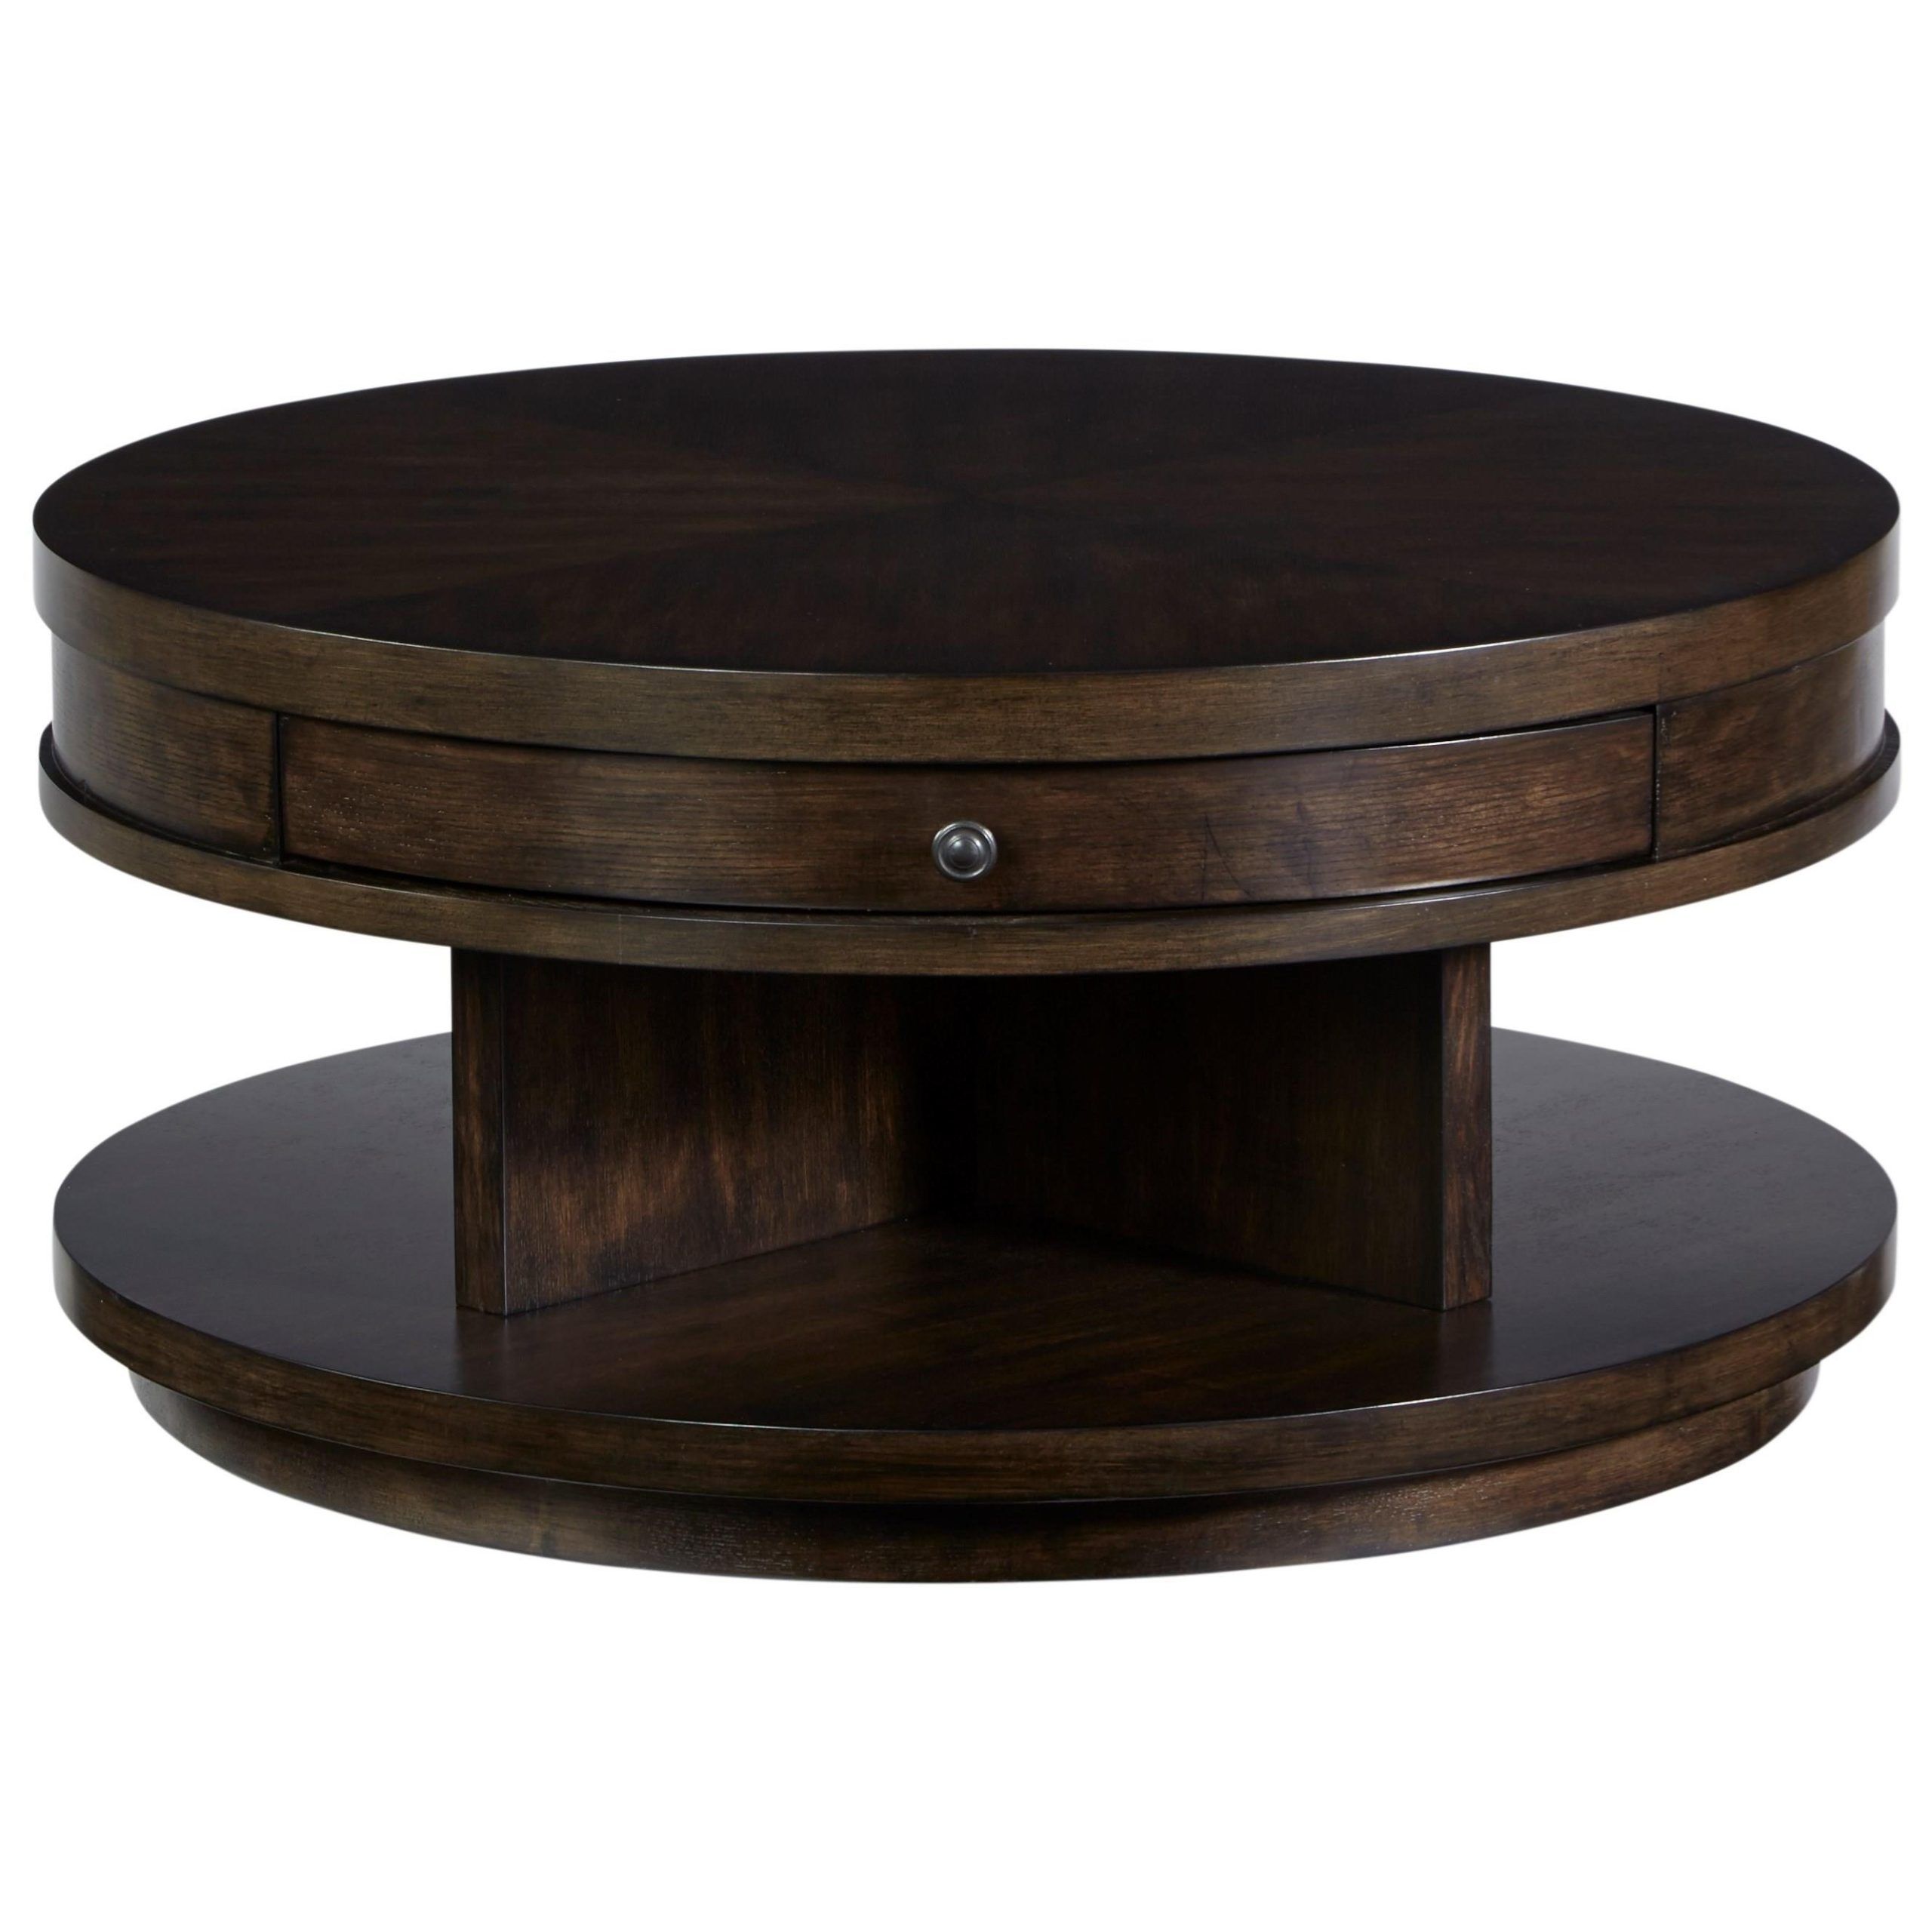 Progressive Furniture Augustine Casual Round Cocktail Table With 1 Intended For Progressive Furniture Cocktail Tables (View 10 of 20)